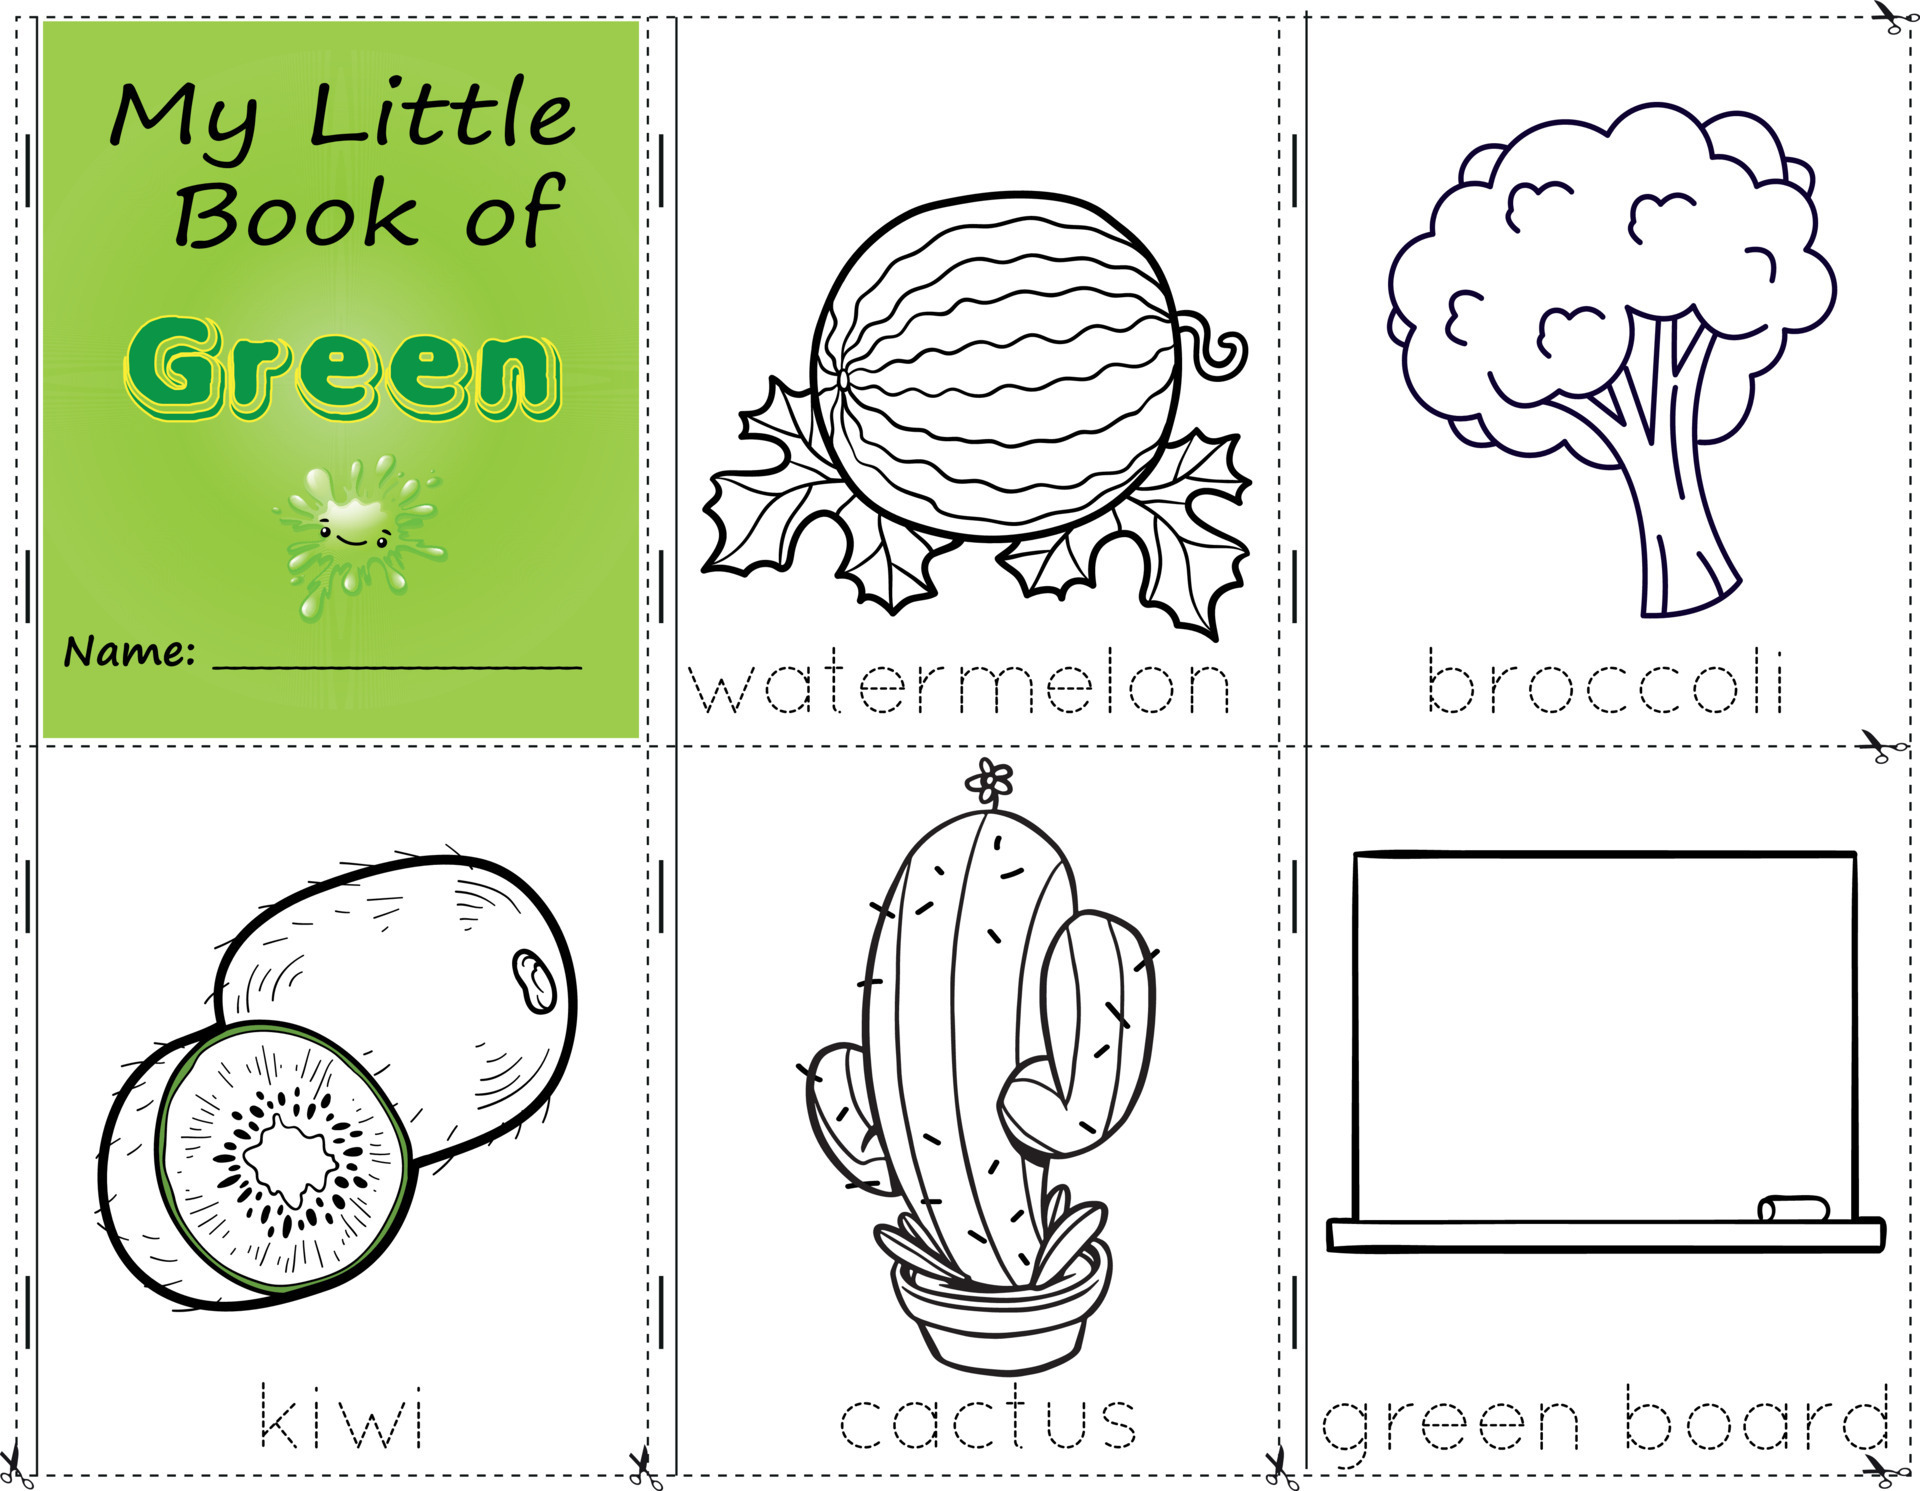 My Little Book of Green Color objects green to paint them as they are ...